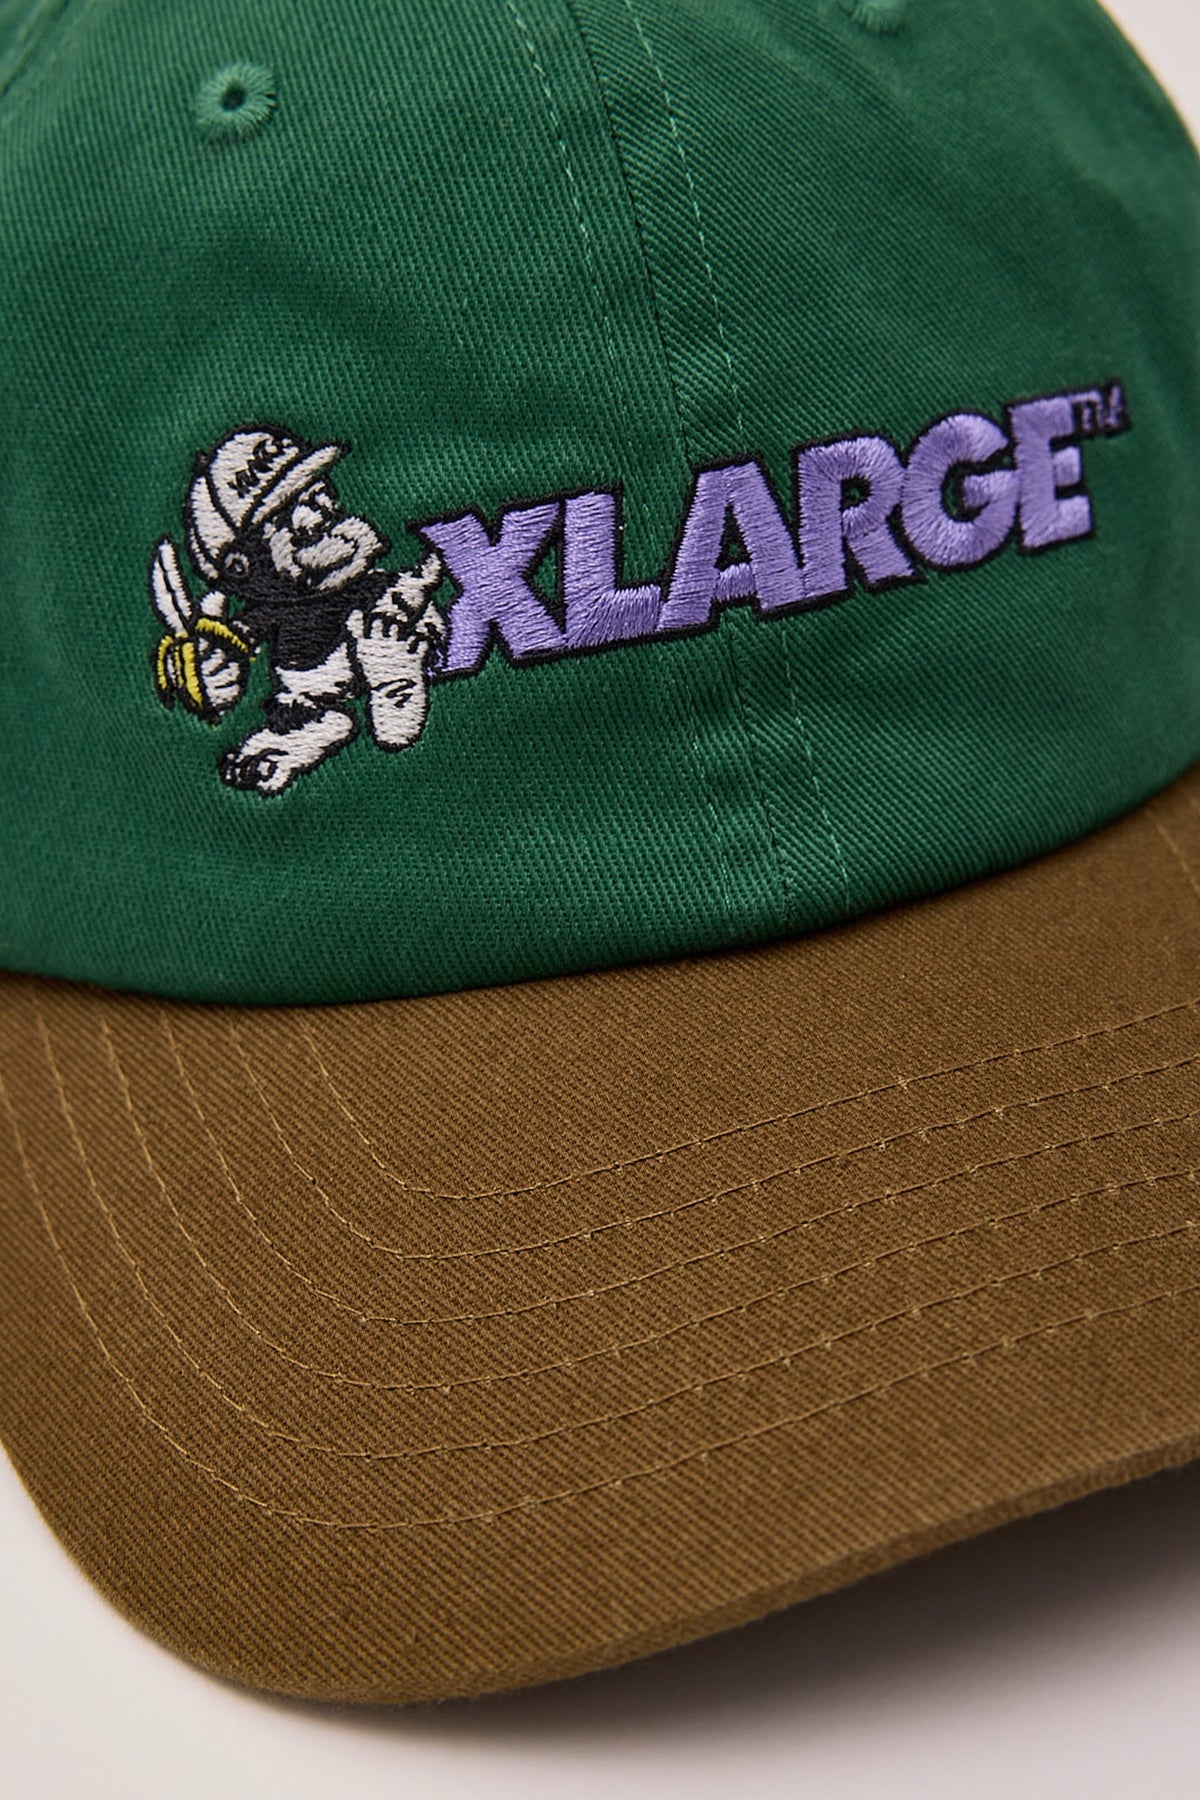 Xlarge Banana Low Pro Cap Forest